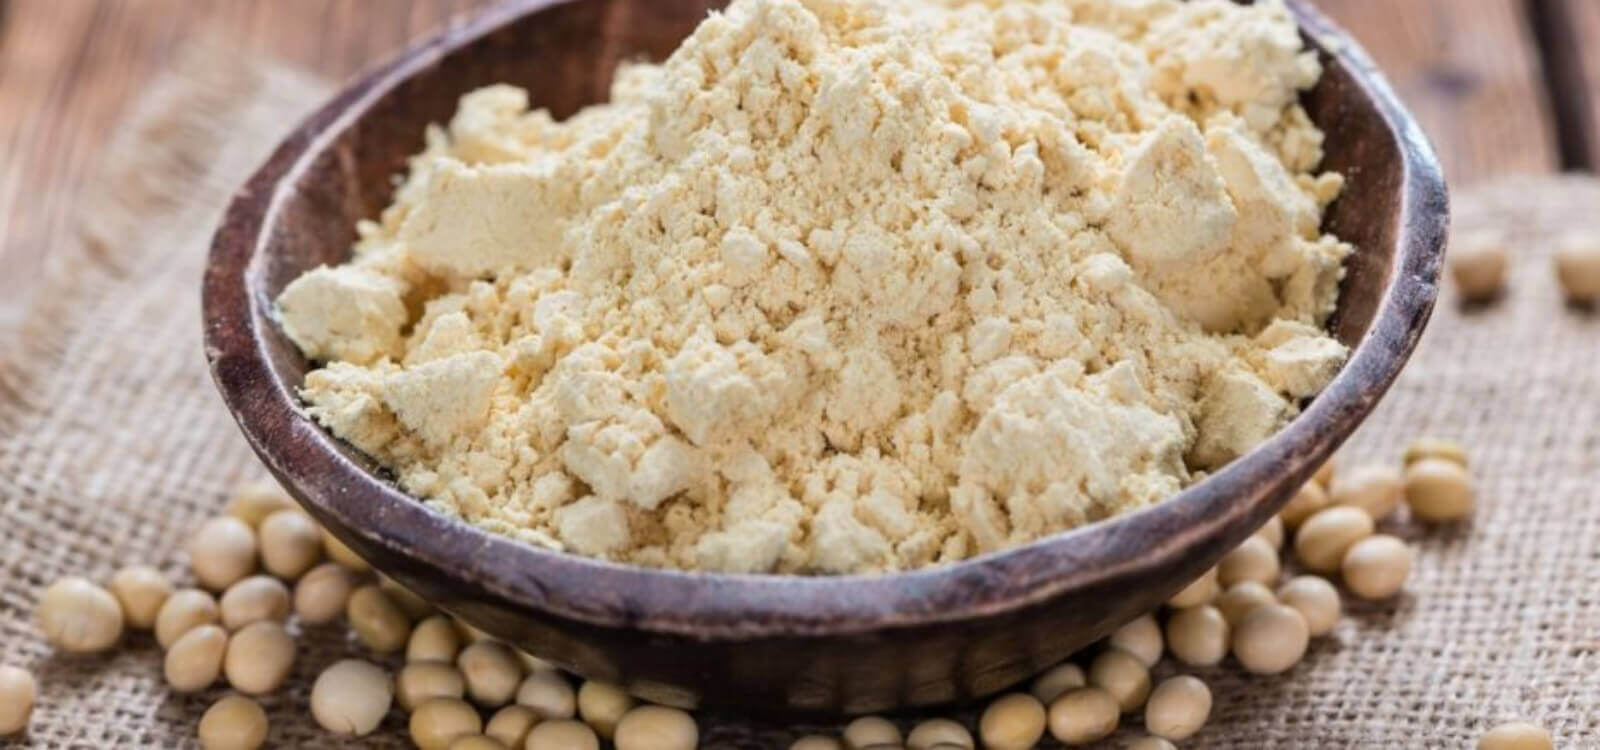 Can Soy Protein Isolate Decrease Your Testosterone? - Legion Athletics